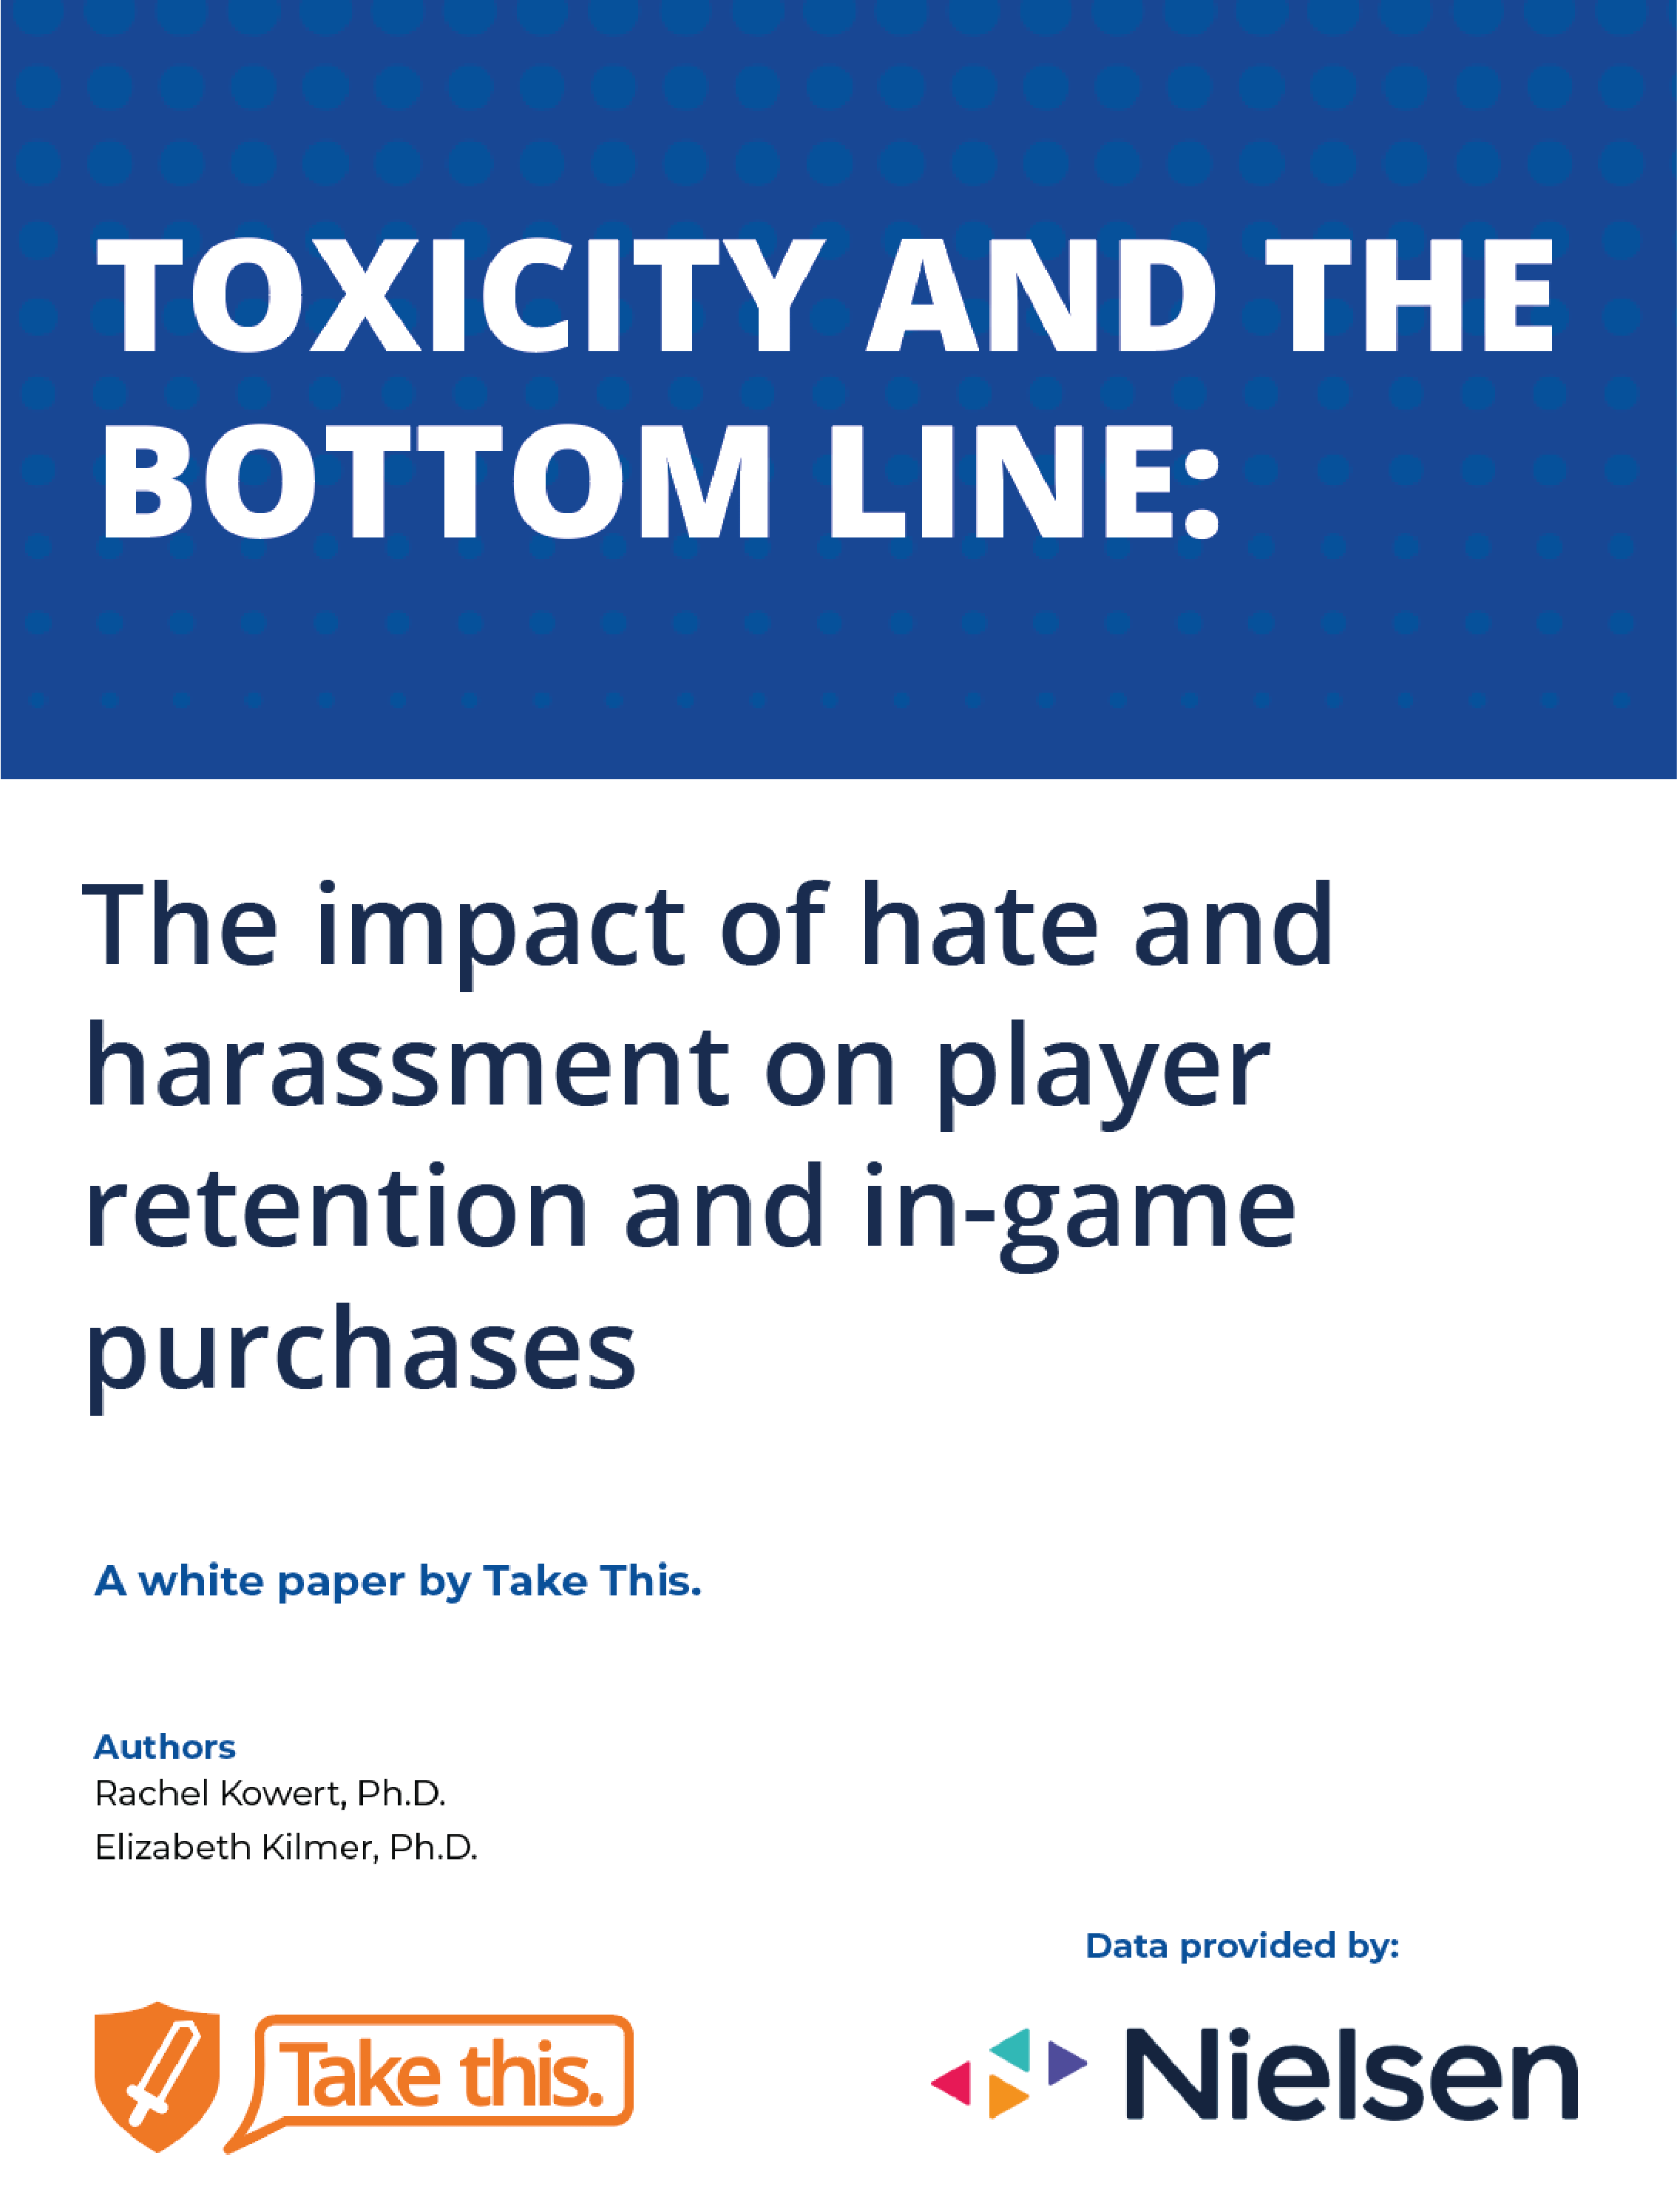 Toxicity and the Bottom Line: The Impact of Hate and Harassment on Player Retention and In-Game Purchases